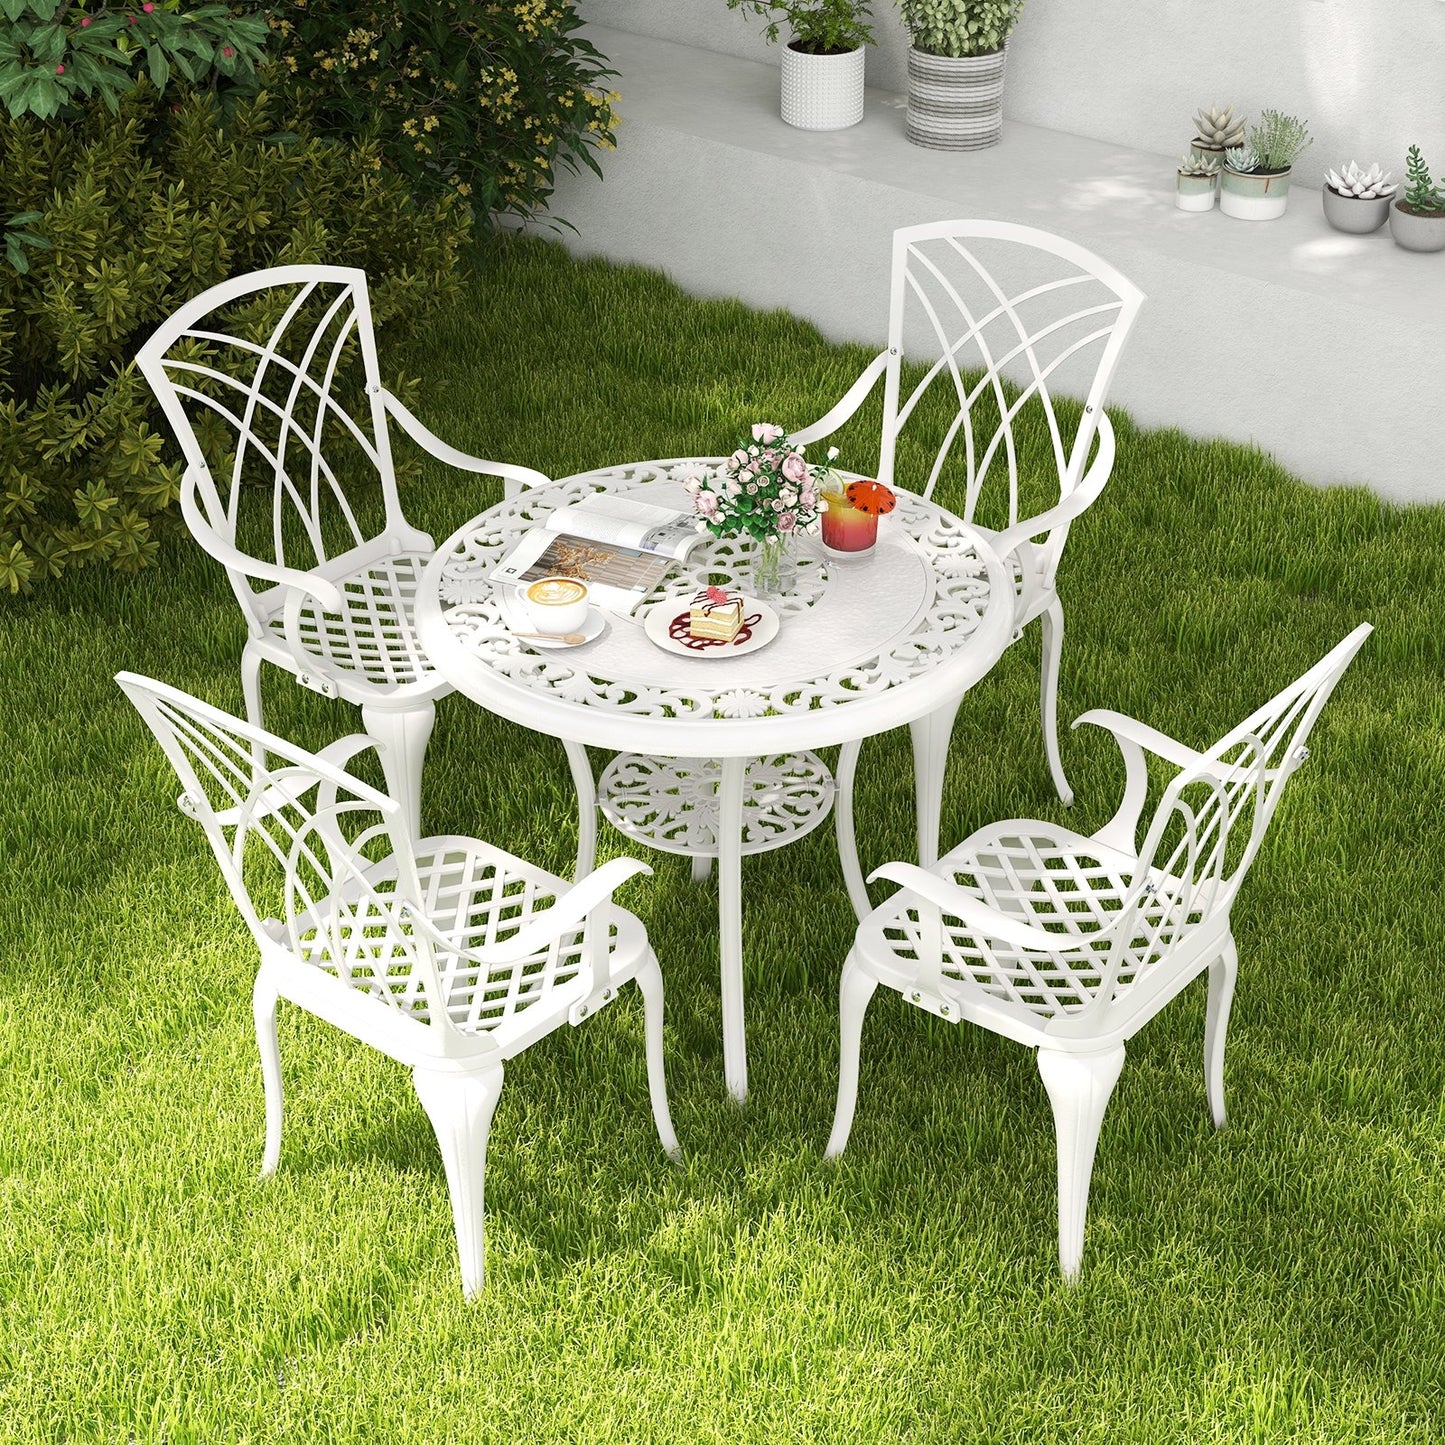 5 Piece Patio Bistro Table Chair Set with Umbrella Hole and Aluminum Frame, White